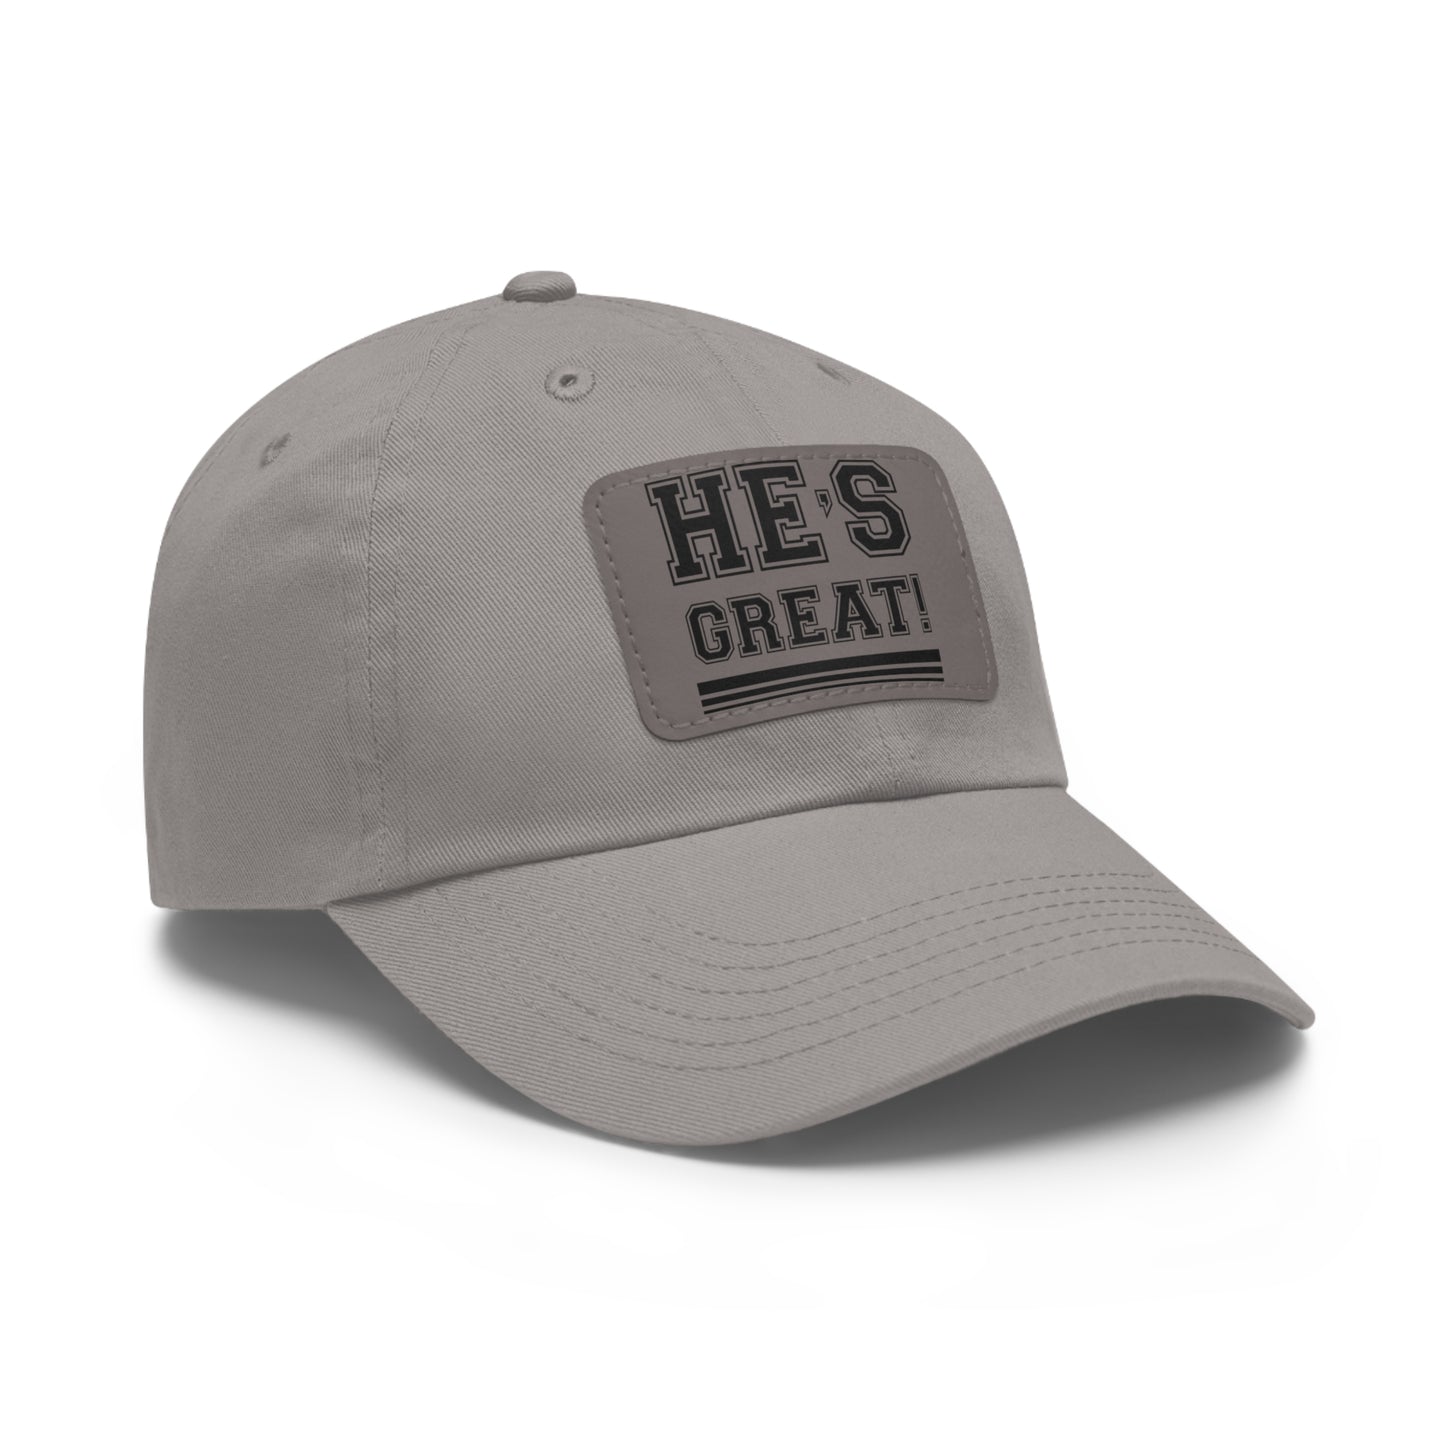 HE'S GREAT - LEATHER PATCH CAP